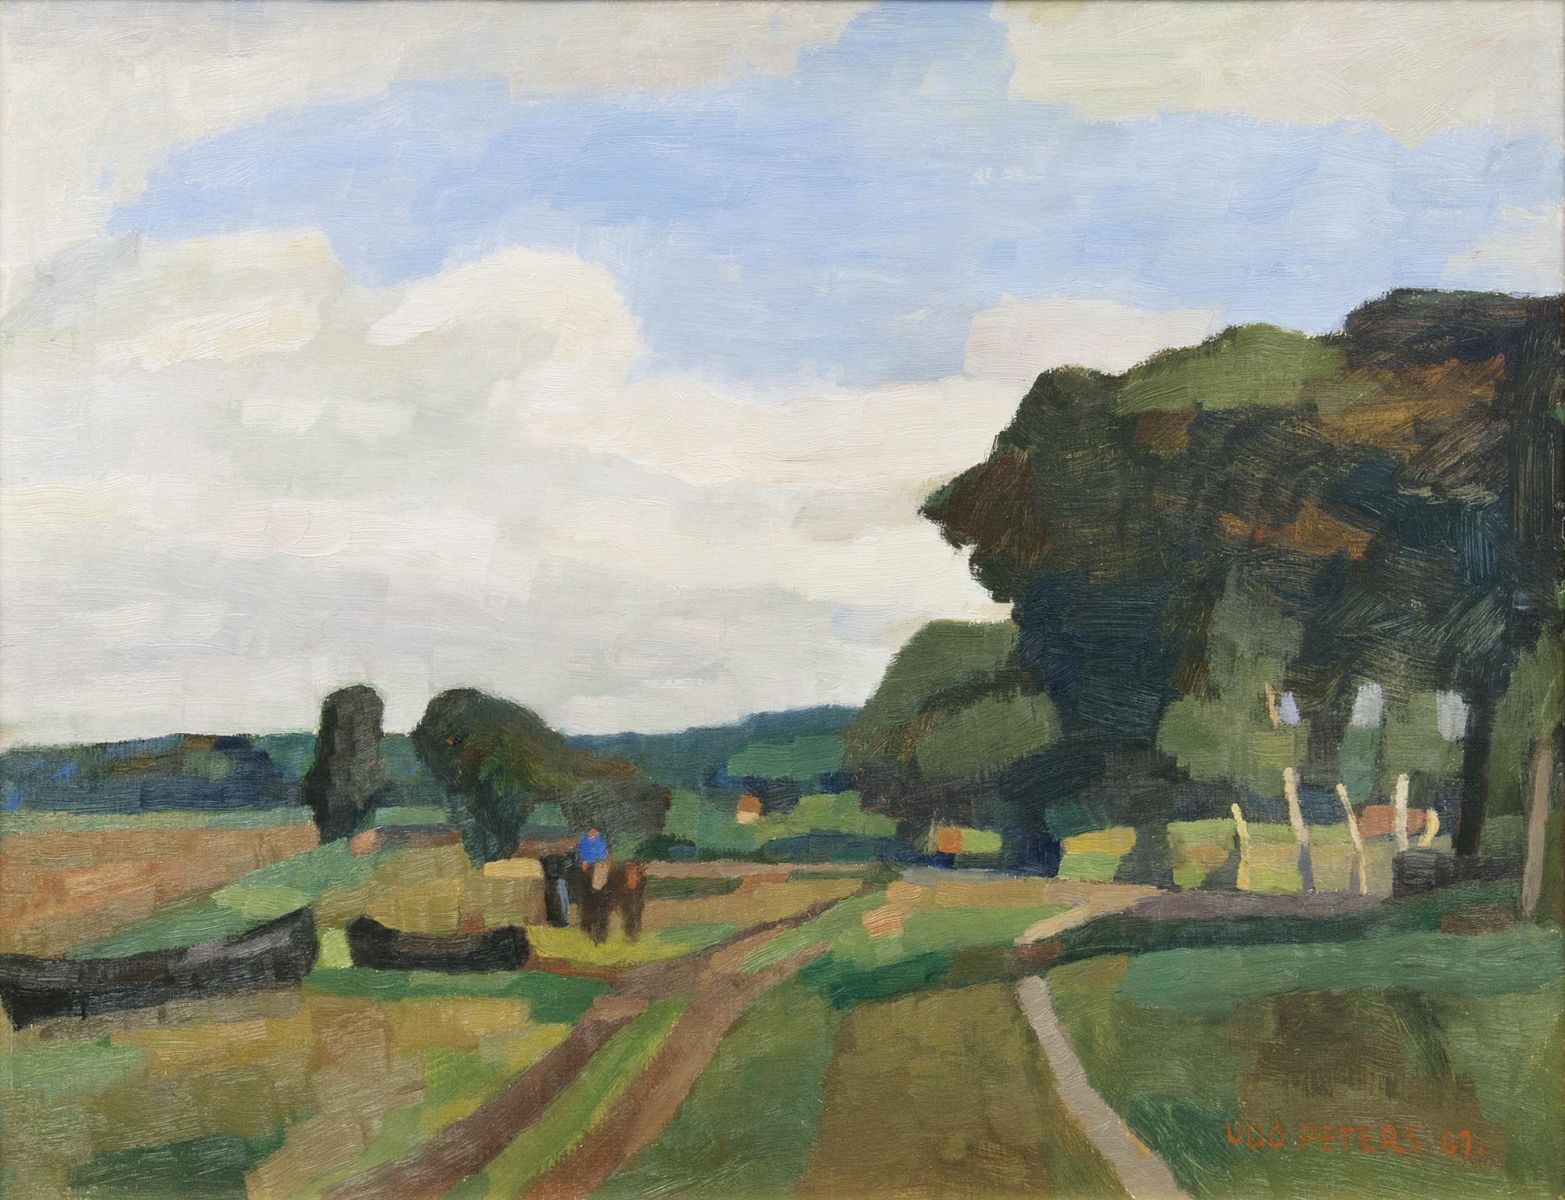 Landscape of Worpswede with horse and cart